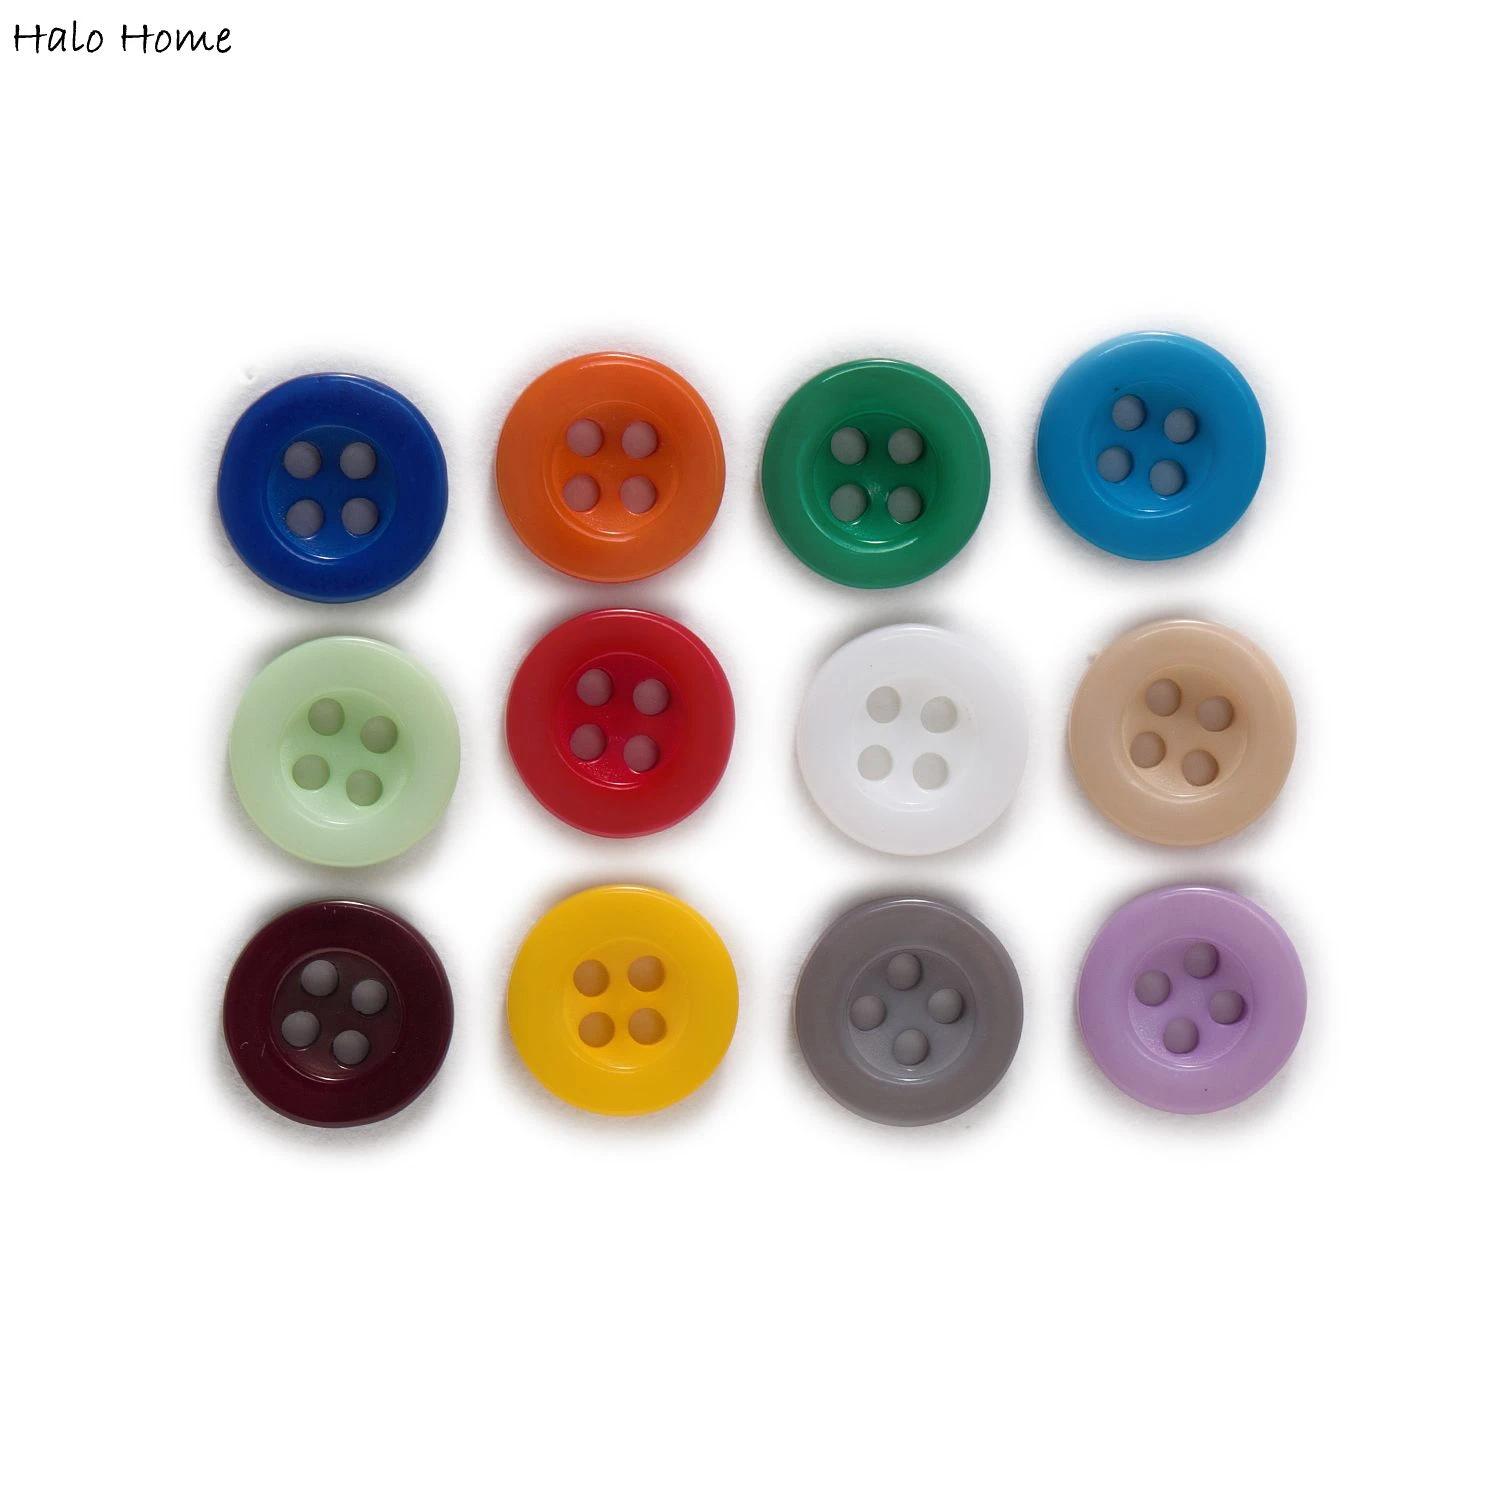 100pcs Thick 4 Hole Resin Buttons Sewing Scrapbooking Clothing Home Crafts Handmade Accessories Card Making DIY Decor 10-15mm